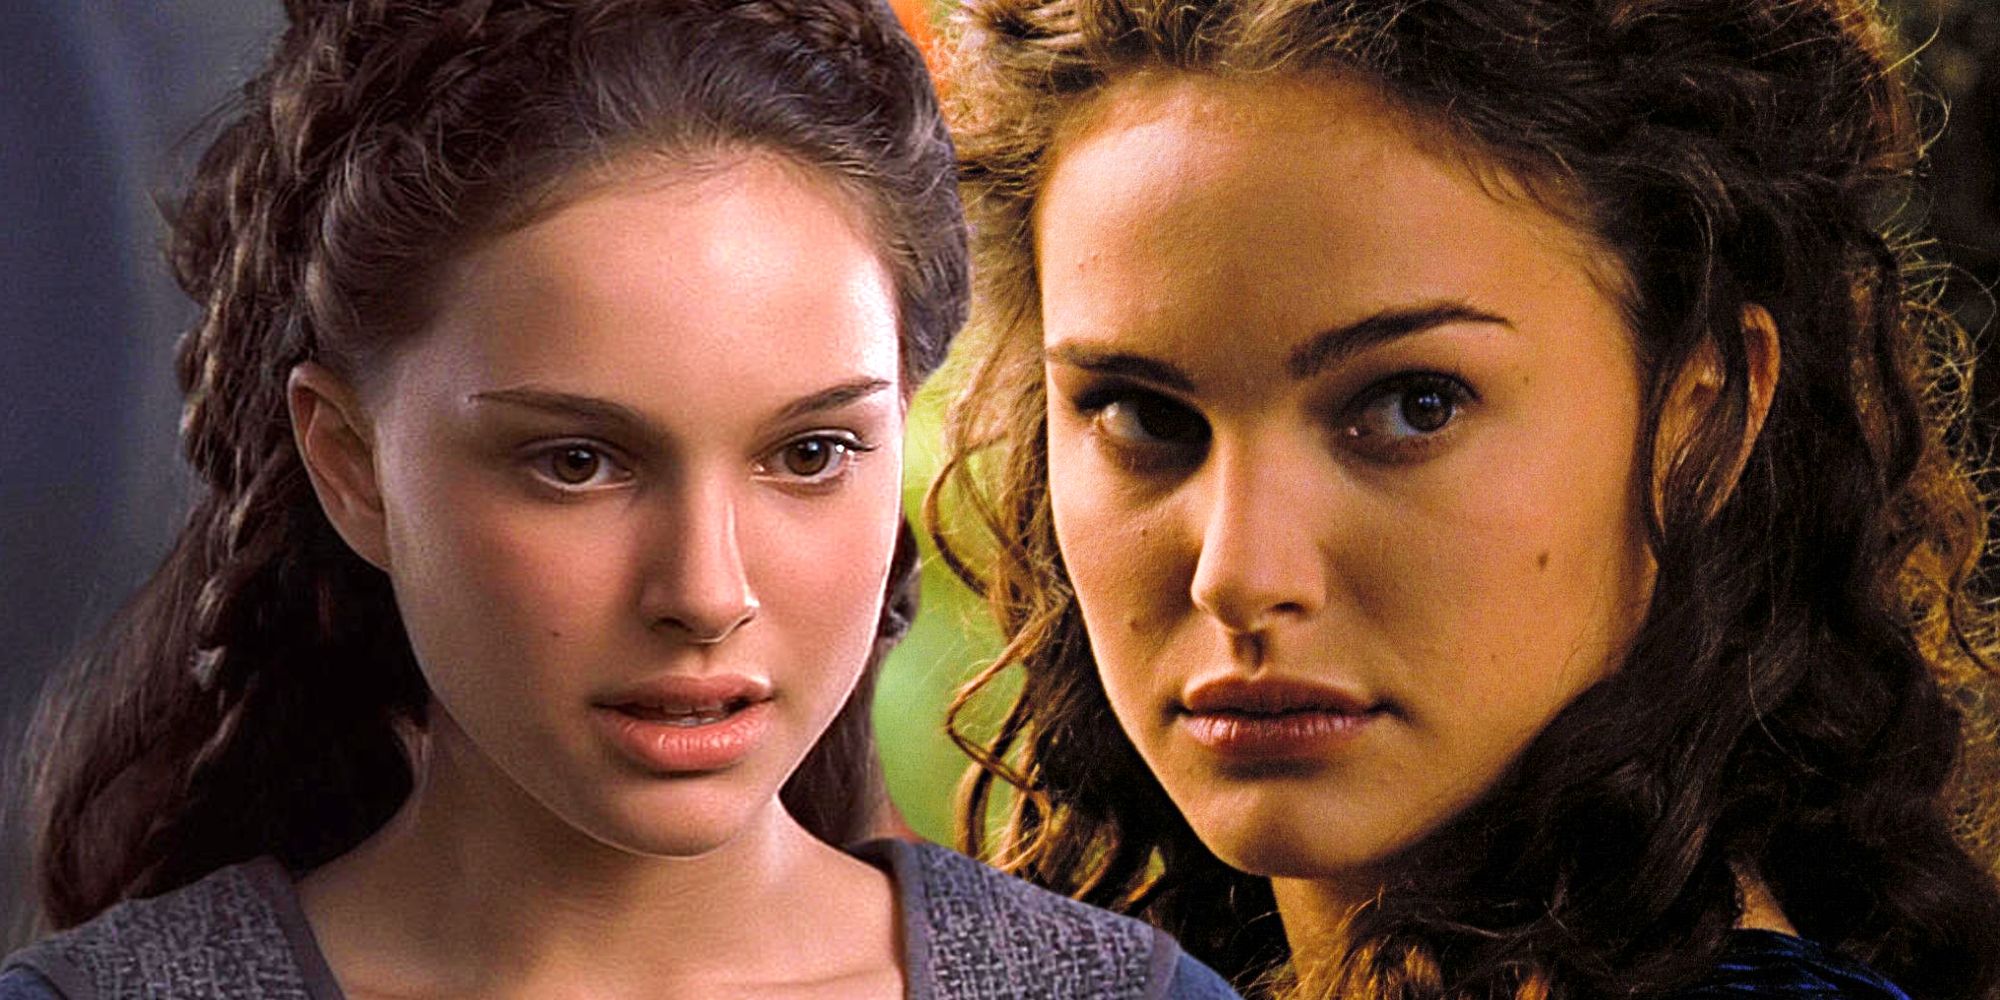 Natalie Portman as Padme in the Star Wars prequel trilogy from The Phantom Menace on the left and Attack of the Clones on the right